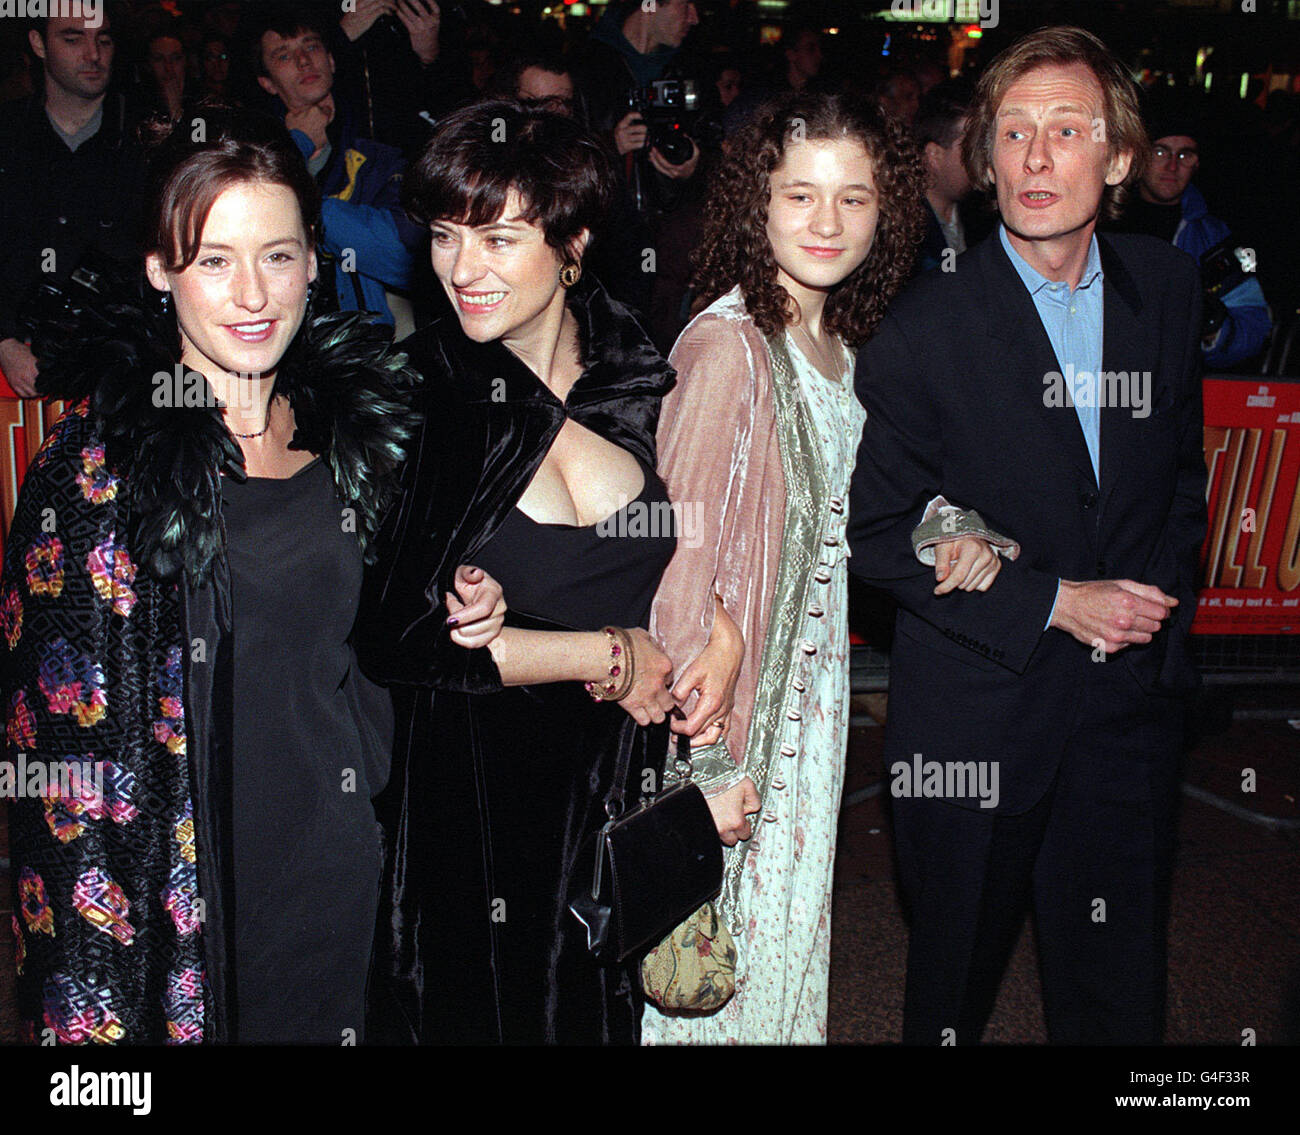 PA NEWS PHOTO 22/10/98 ACTOR BILL NIGHY (RIGHT) AND ACTRESS DIANA QUICK (2ND LEFT) ARRIVE AT THE CELEBRITY GALA PREMIERE OF THE FILM 'STILL CRAZY' AT THE WARNER WEST END CINEMA, LEICESTER SQUARE, LONDON. Stock Photo